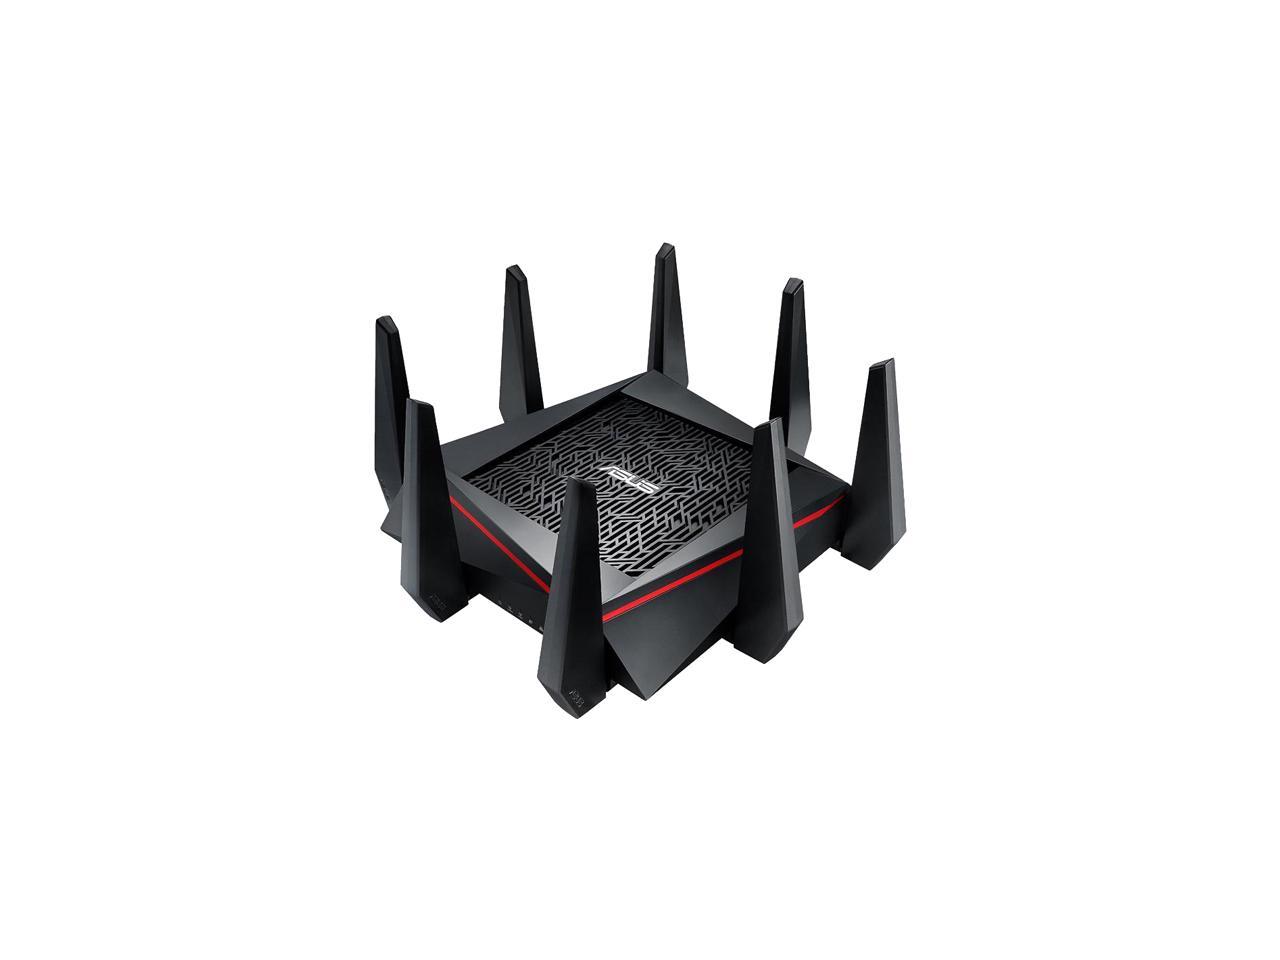 ASUS AC5300 Wi-Fi Tri-band Gigabit Wireless Router with 4x4 MU-MIMO, 4 x LAN Ports, AiProtection Network Security and WTFast Game Accelerator, AiMesh Whole Home Wi-Fi System Compatible (RT-AC5300)